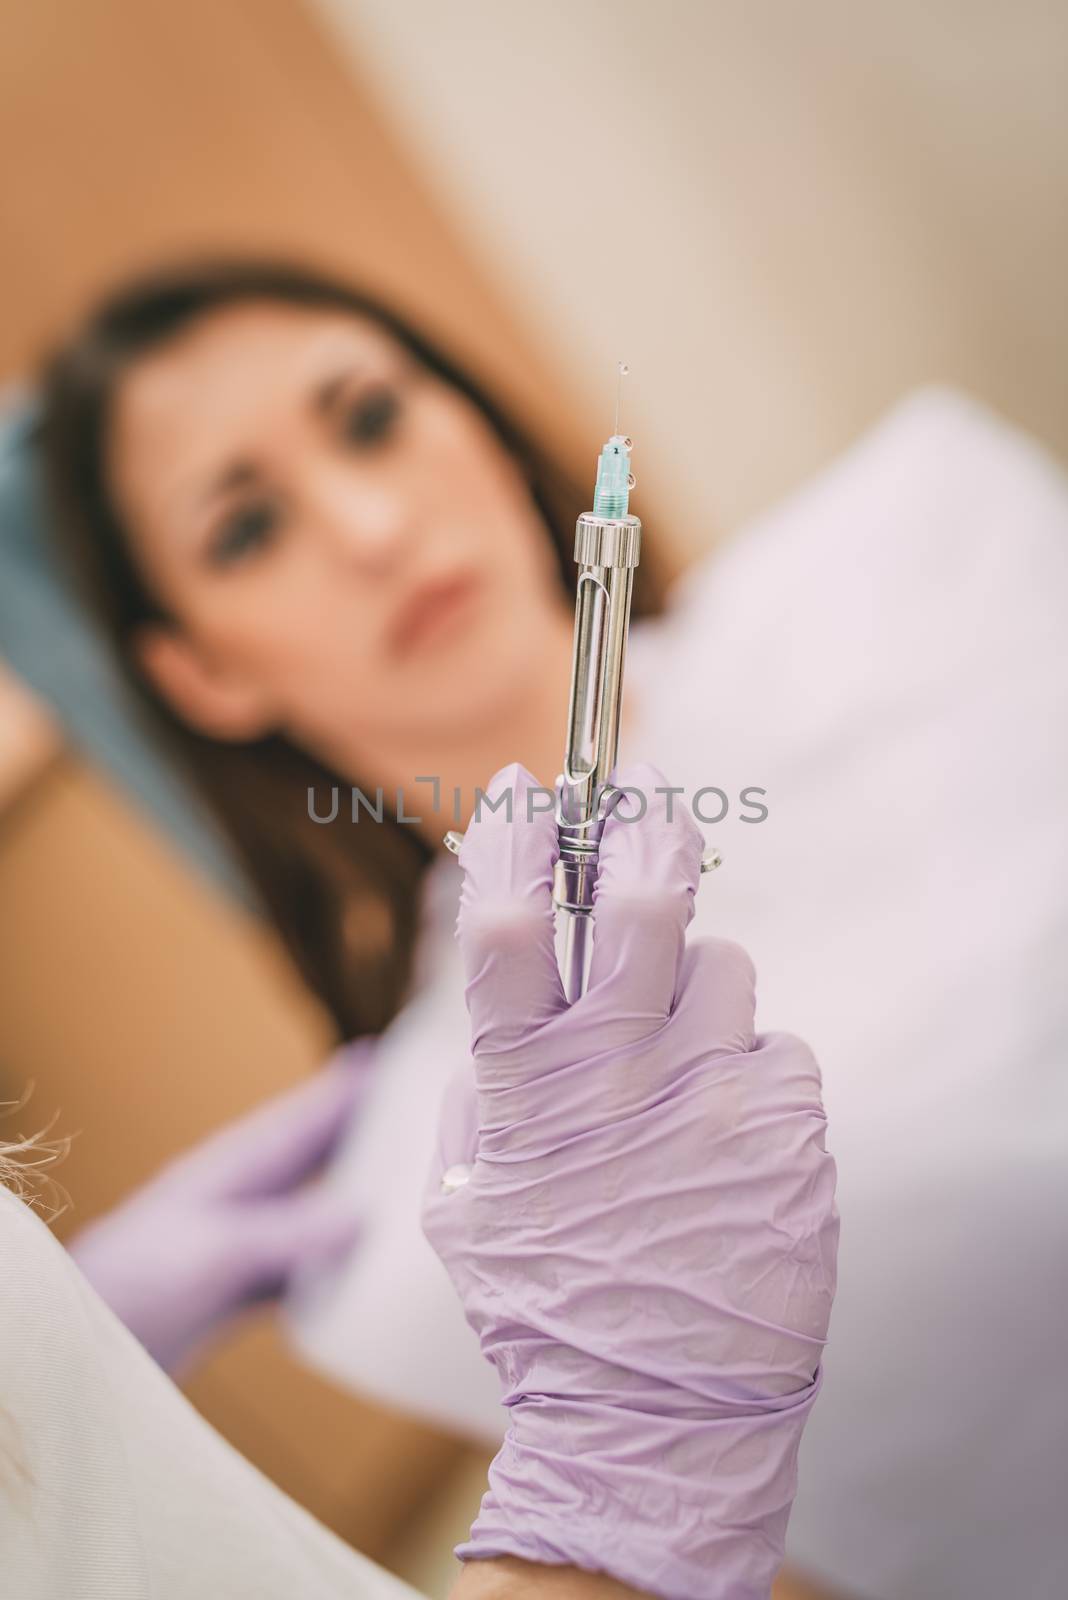 Dentist holding an injection of anesthesia. Selective focus. Focus on syringe. Female patient sitting at dental office in background.